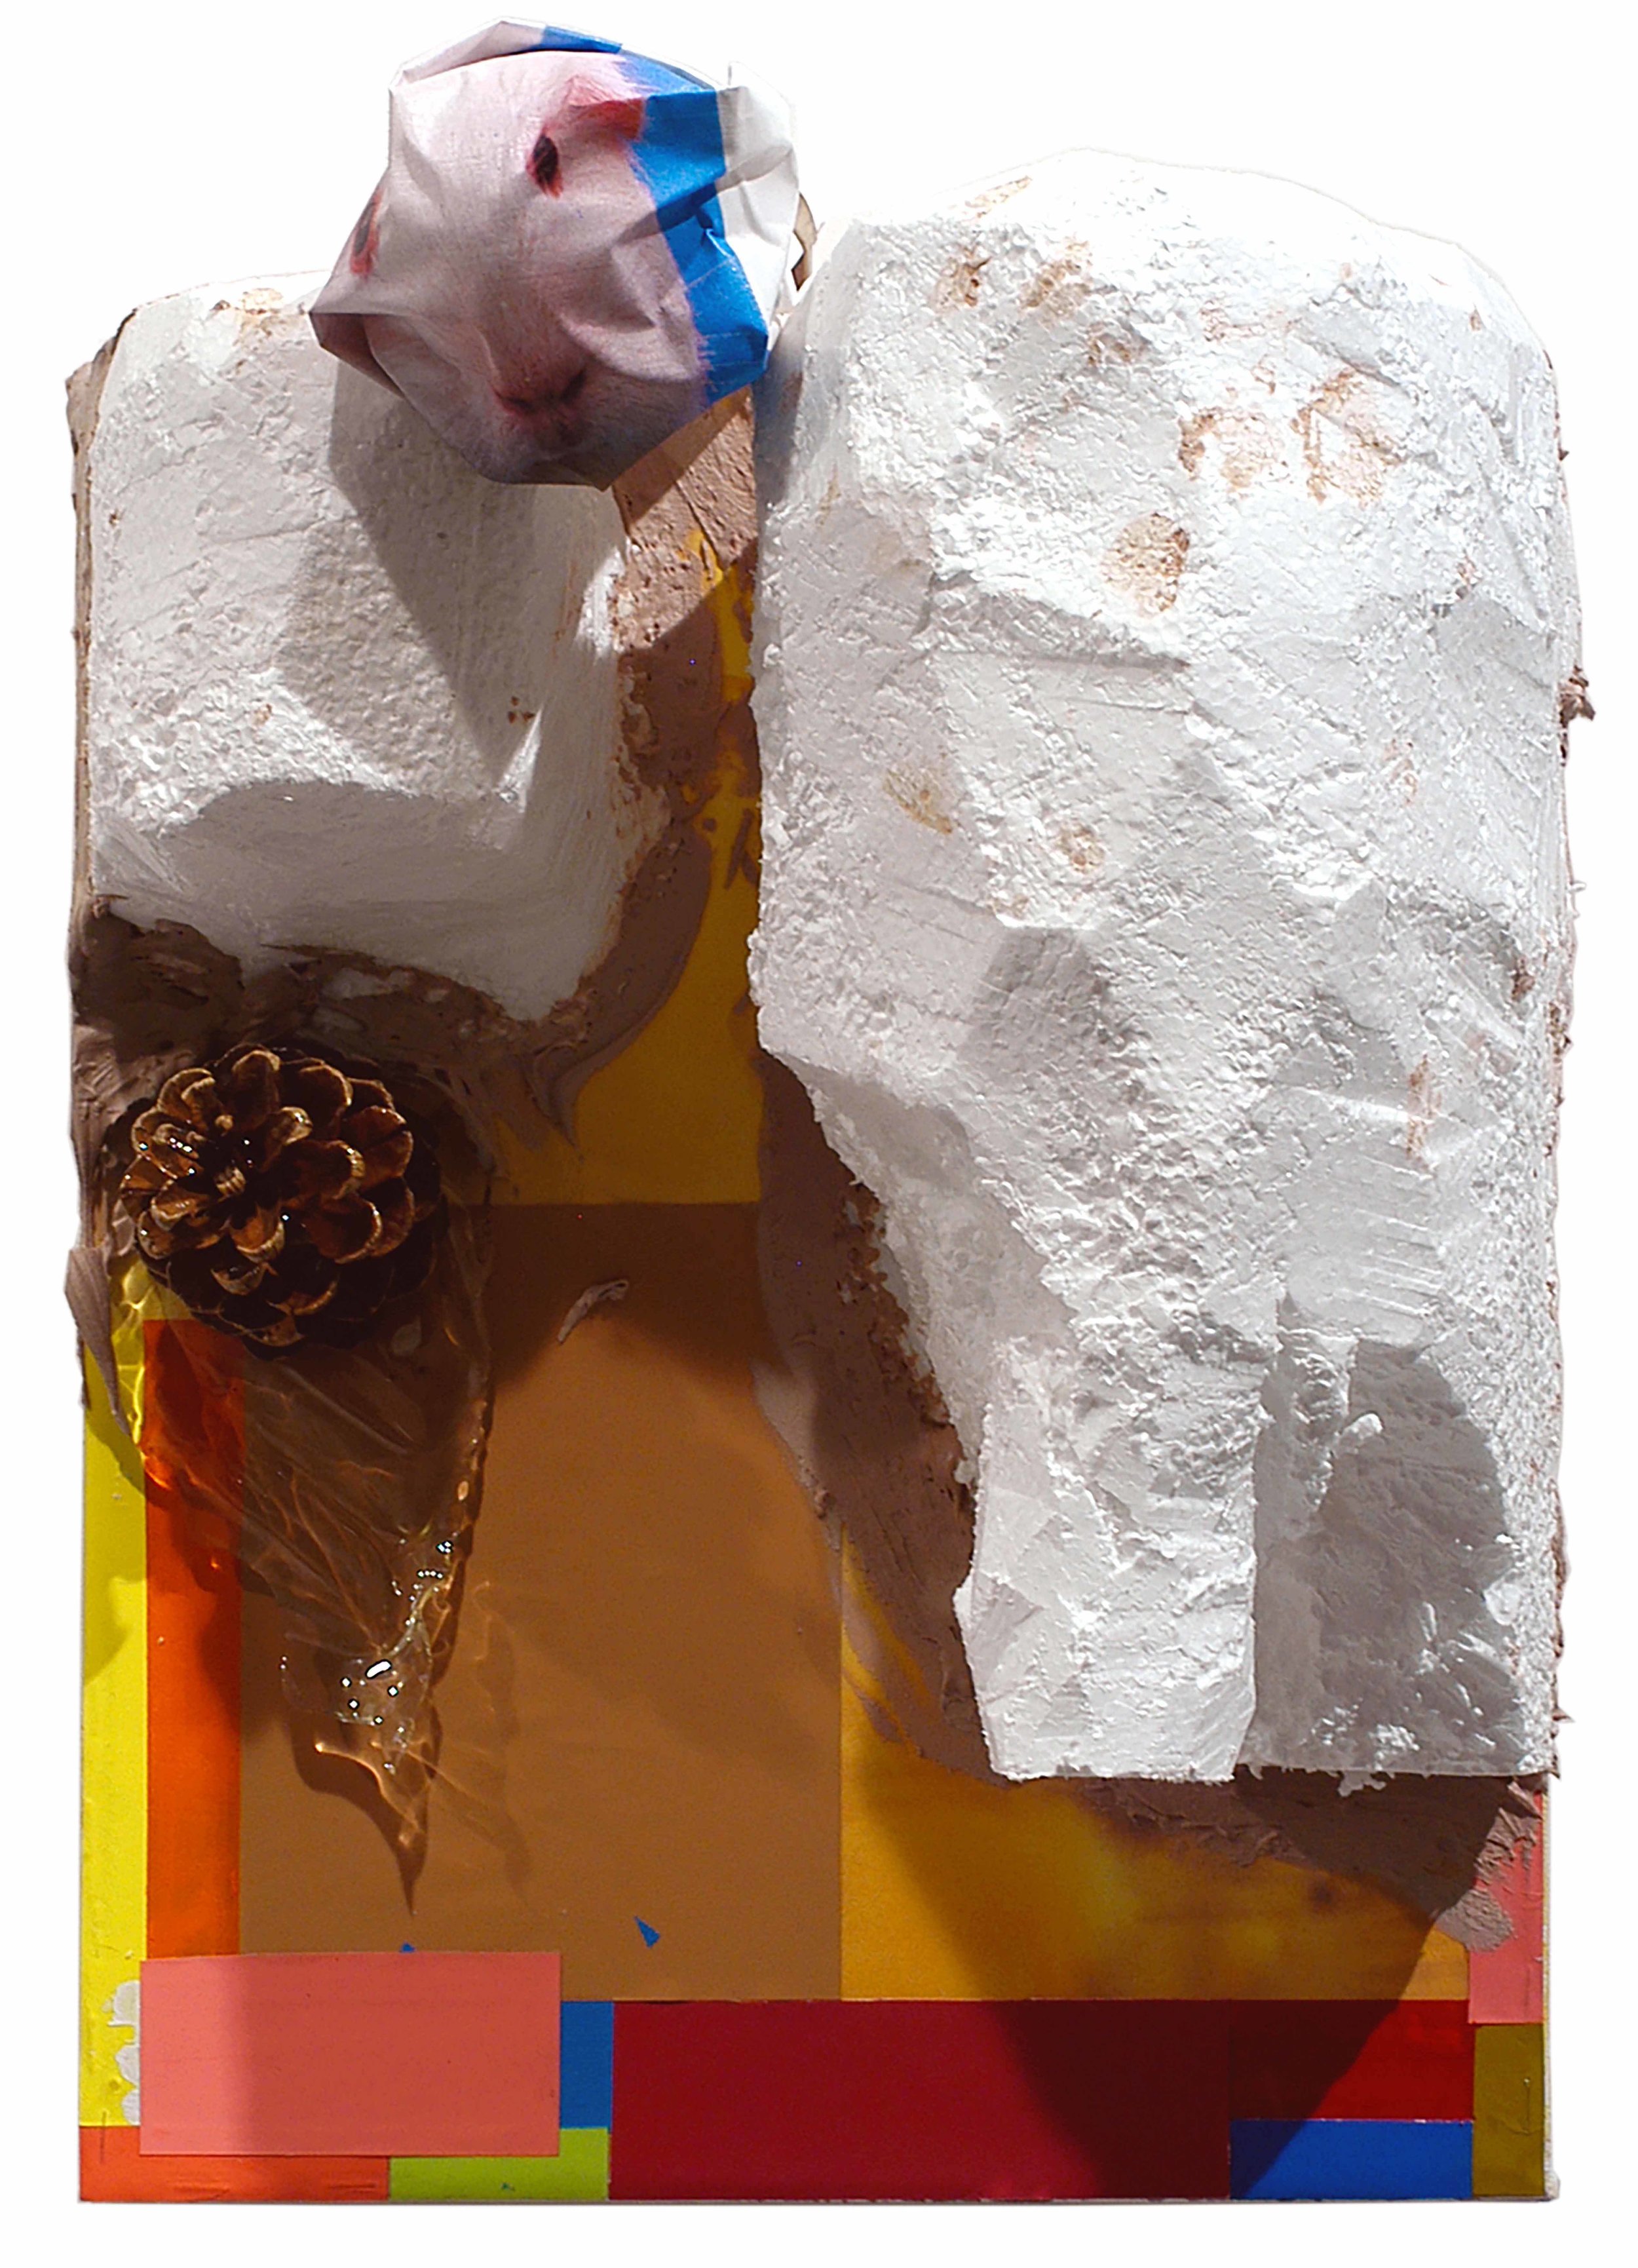  Drew Beattie  Hole in My Island &nbsp; 2005 acrylic, bondo, collage on light bulb, styrofoam, pine cone, resin and colored paper on canvas 14½ x 11¼ inches 